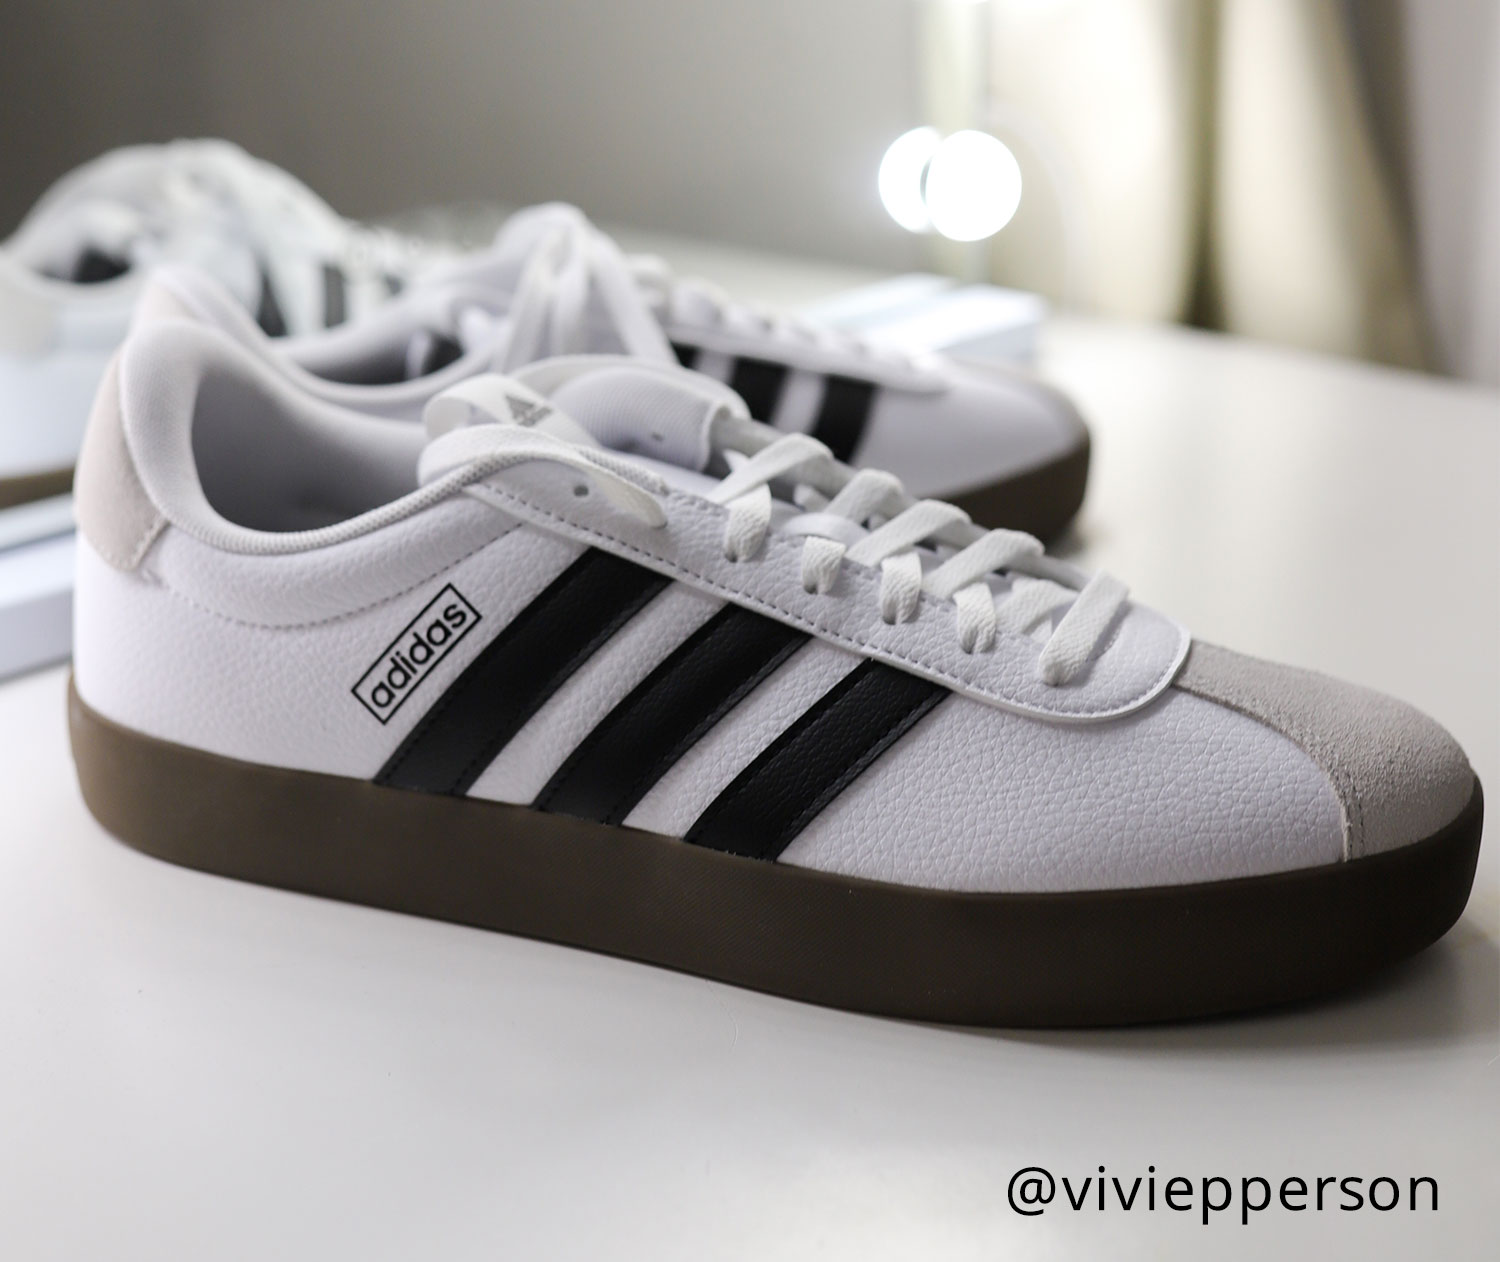 adidas court sneakers